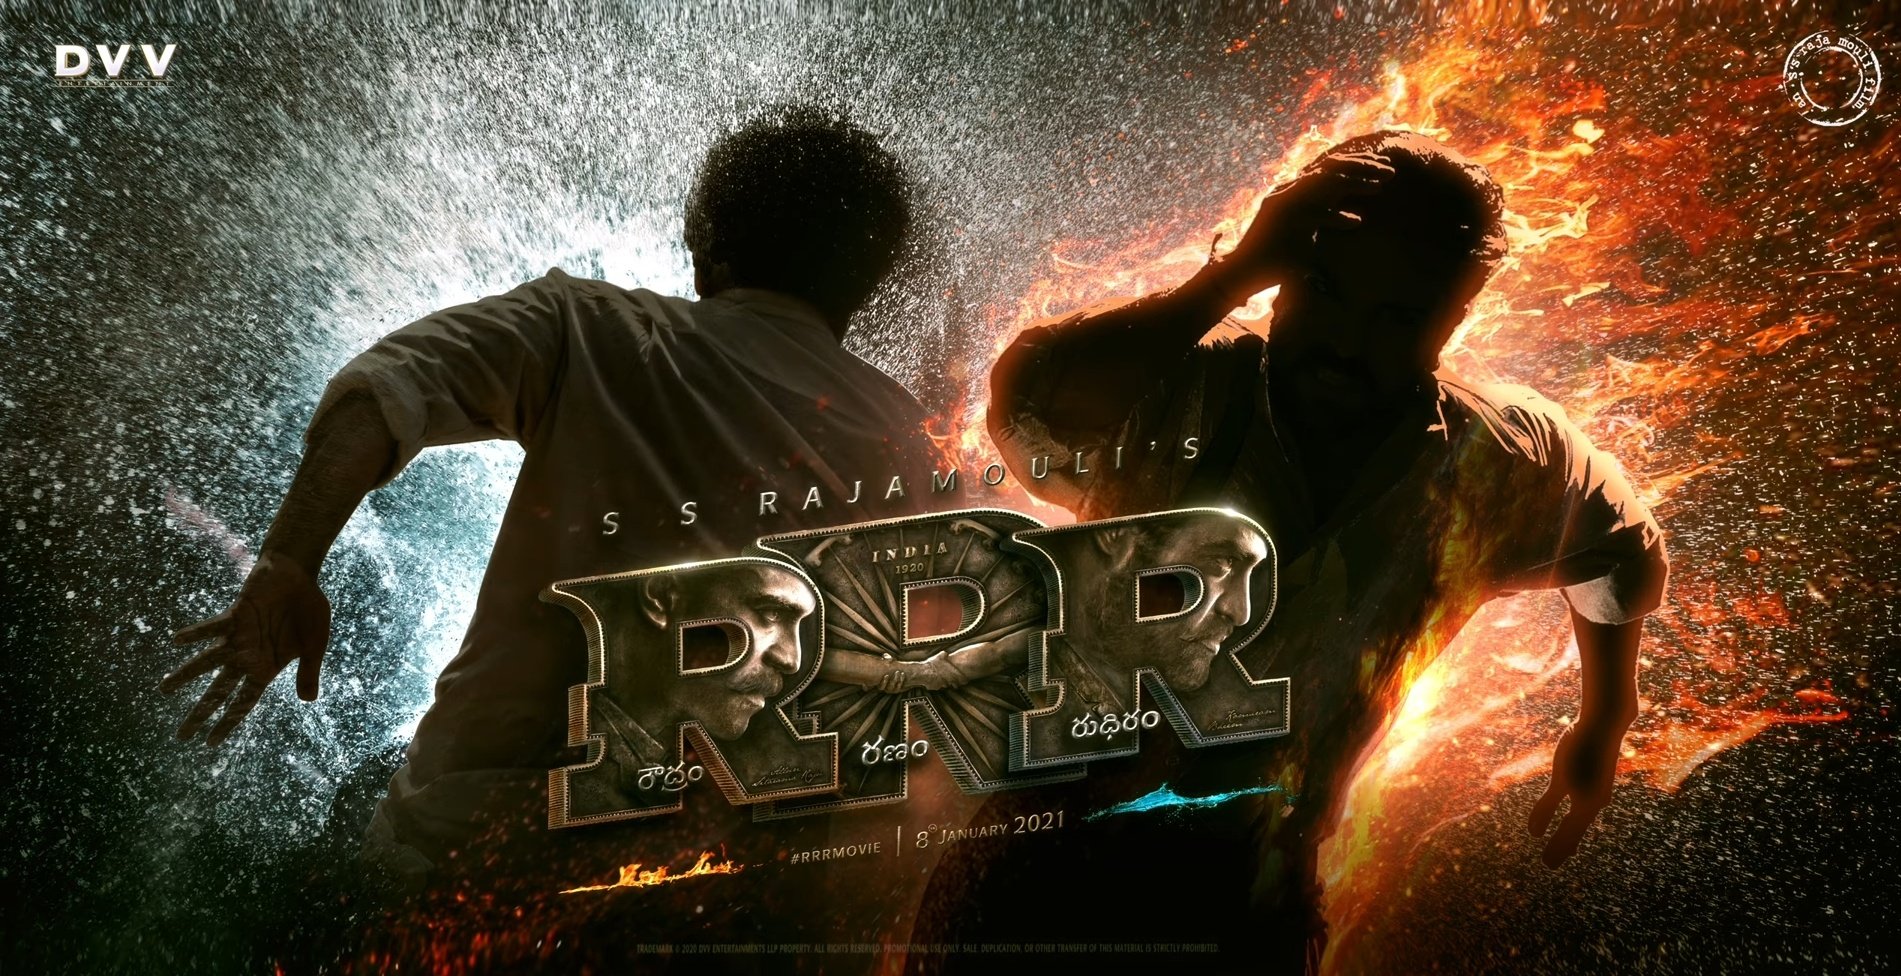 RRR Movie: Watch the Official Motion Poster Video of SS Rajamouli’s RRR